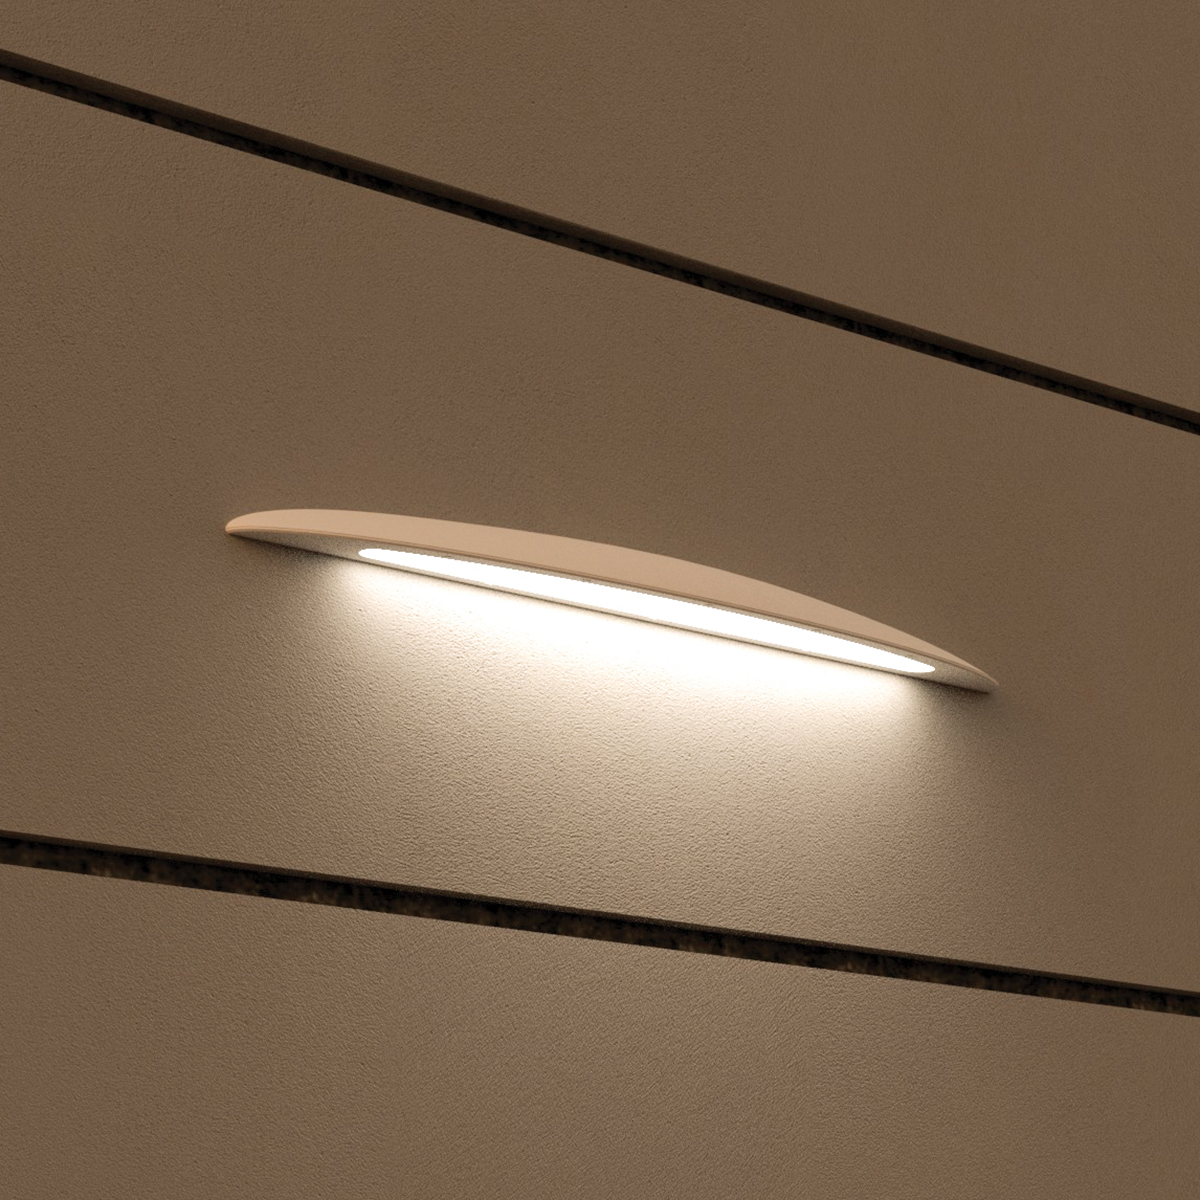 An outdoor wall sconce with a smooth, curved body